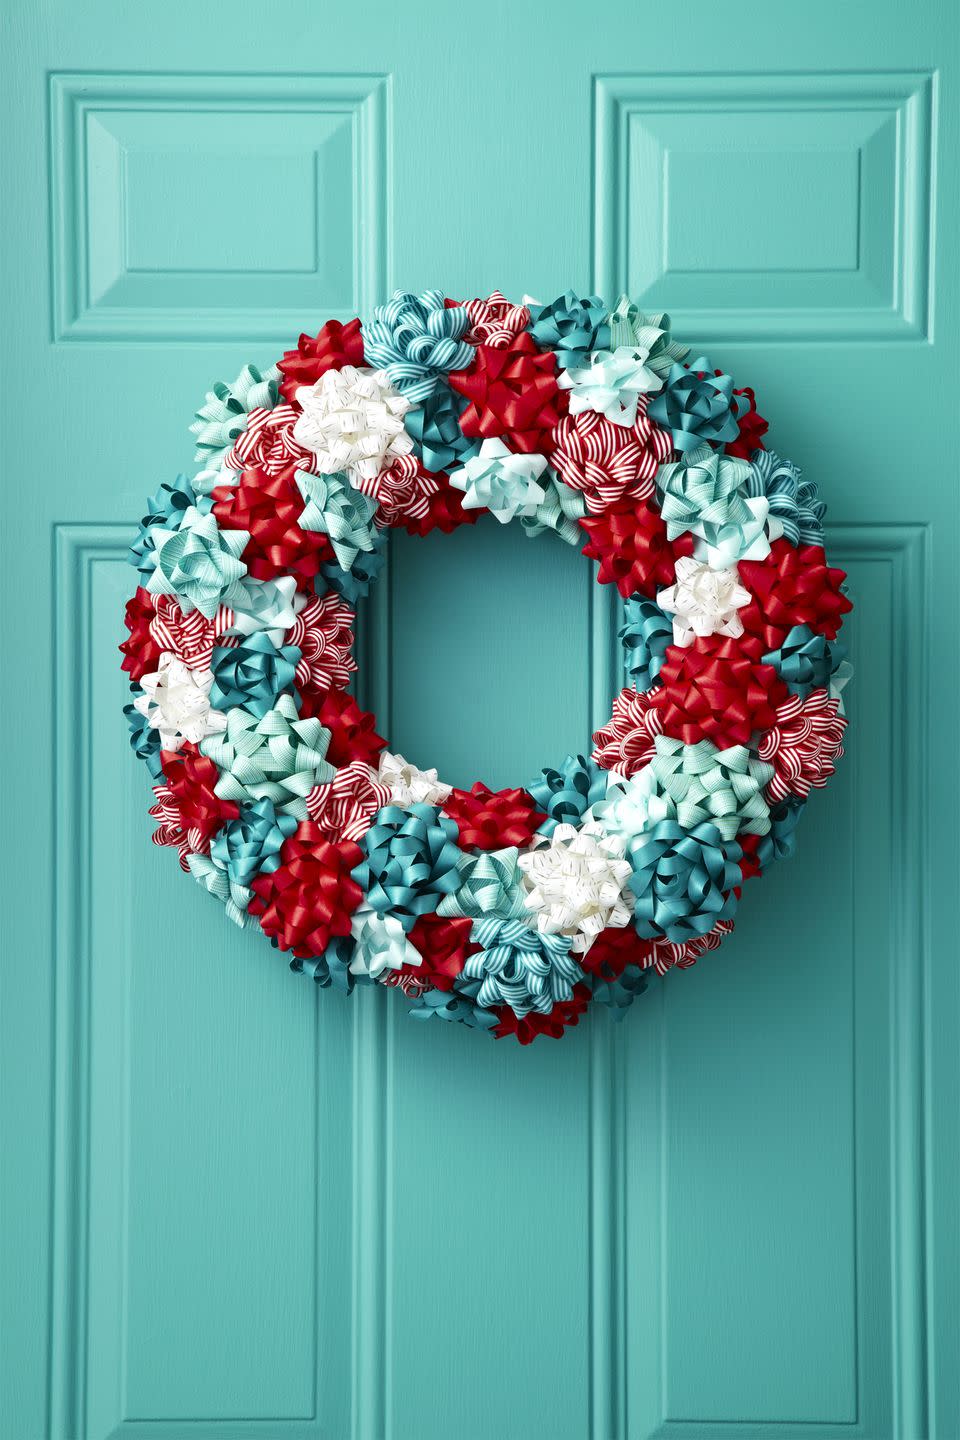 <p>For a burst of color, embellish a plain foam wreath with leftover bows from last year's wrapping. Use a combination of red, white and blue colors, while sprinkling in a few striped picks. </p><p><a class="link " href="https://www.amazon.com/Tatuo-Christmas-Metallic-Adhesive-Decorating/dp/B07HSZ6PXX/?tag=syn-yahoo-20&ascsubtag=%5Bartid%7C10067.g.42146682%5Bsrc%7Cyahoo-us" rel="nofollow noopener" target="_blank" data-ylk="slk:Shop Now">Shop Now</a><br></p>